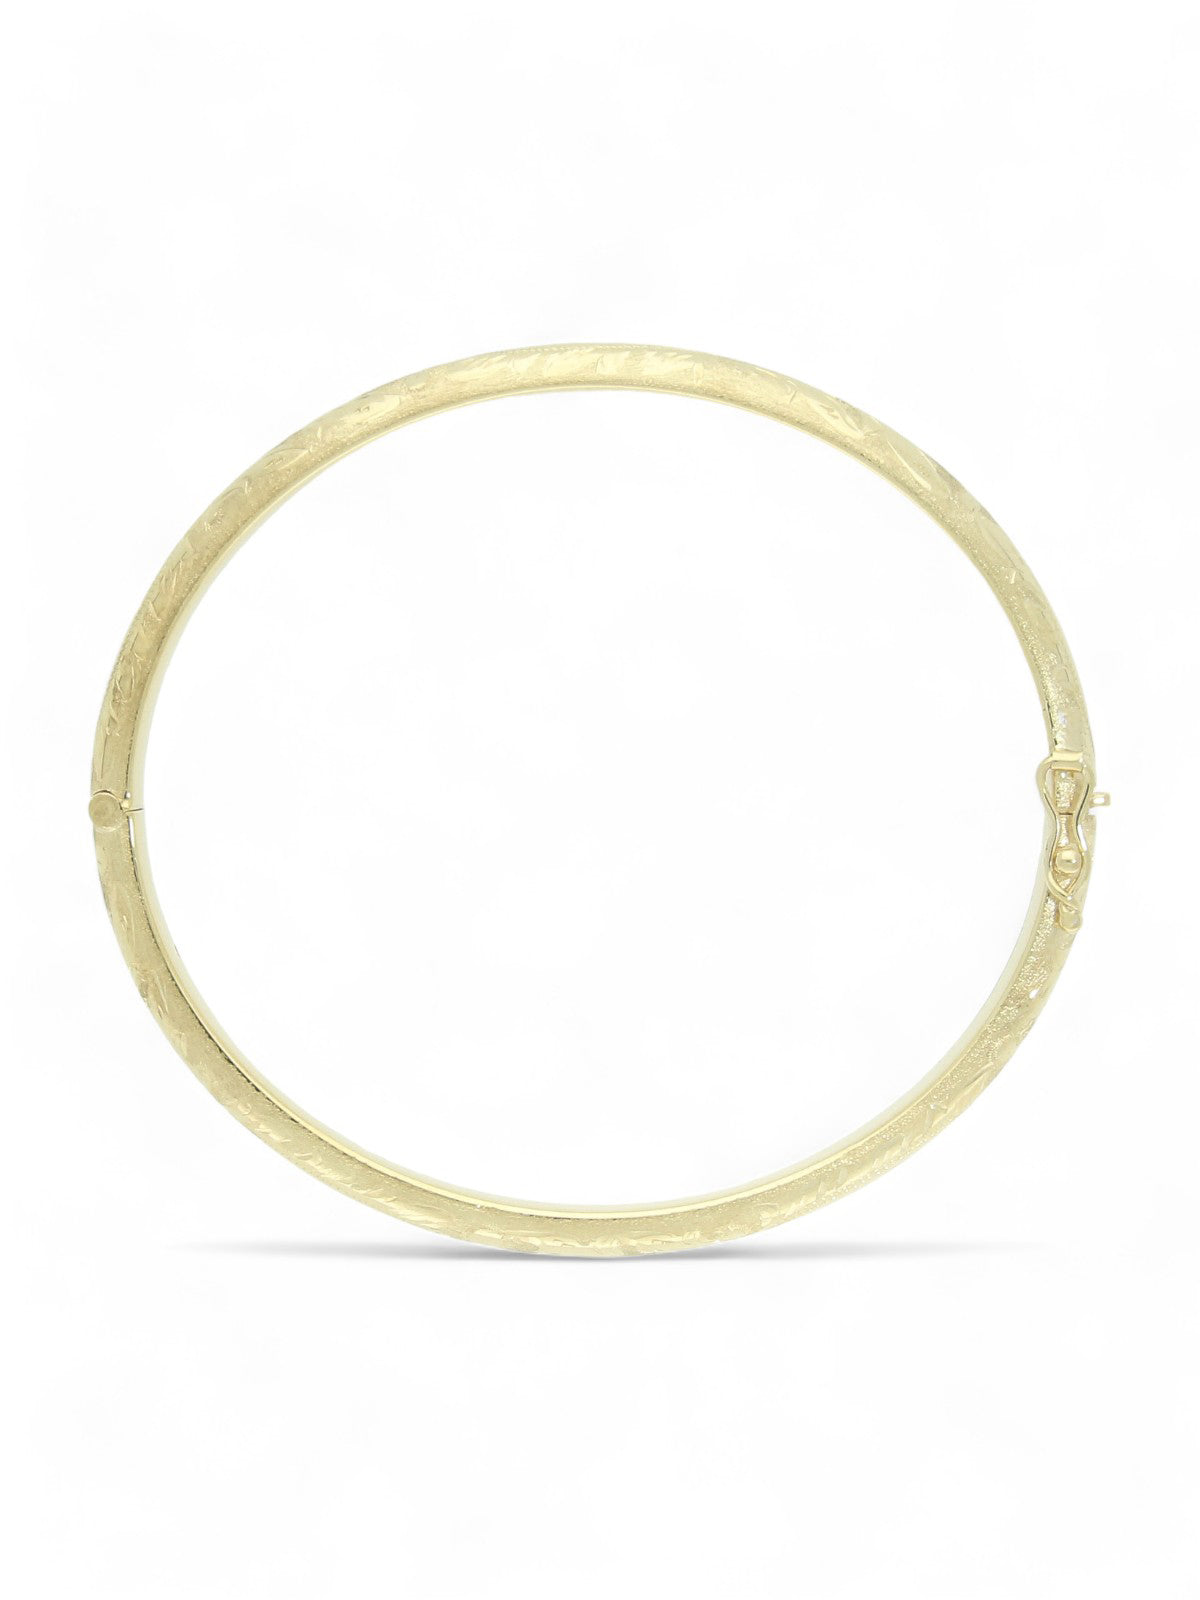 Hand Engraved Bangle in 9ct Yellow Gold